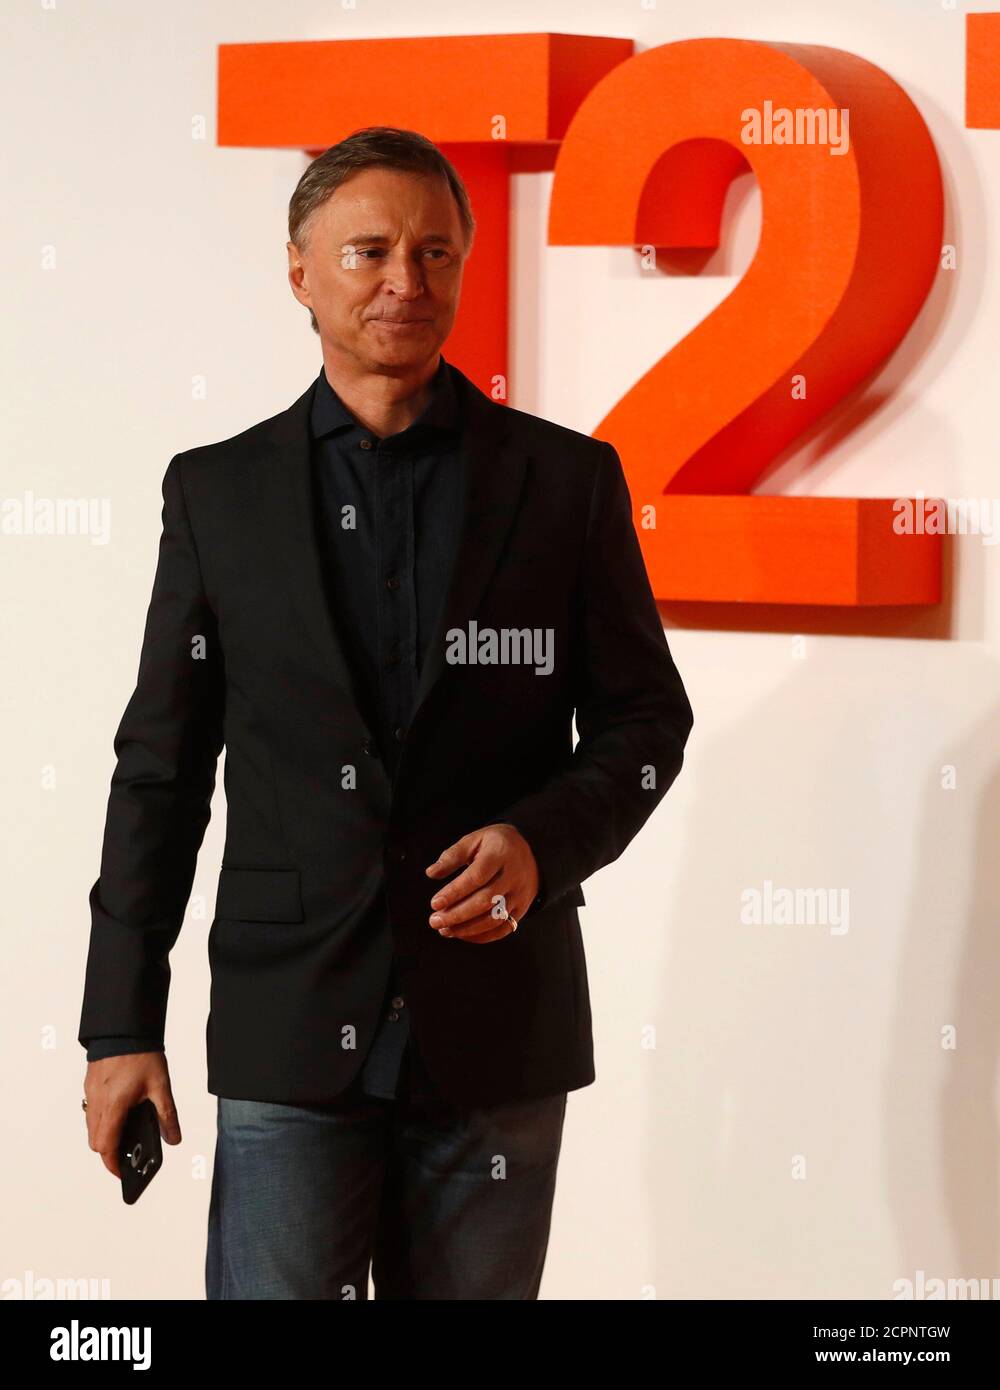 Lève toi et marche [Tim] Actor-robert-carlyle-poses-as-he-arrives-at-the-world-premiere-of-the-film-t2-trainspotting-in-edinburgh-scotland-britain-january-22-2017-reutersrussell-cheyne-2CPNTGW